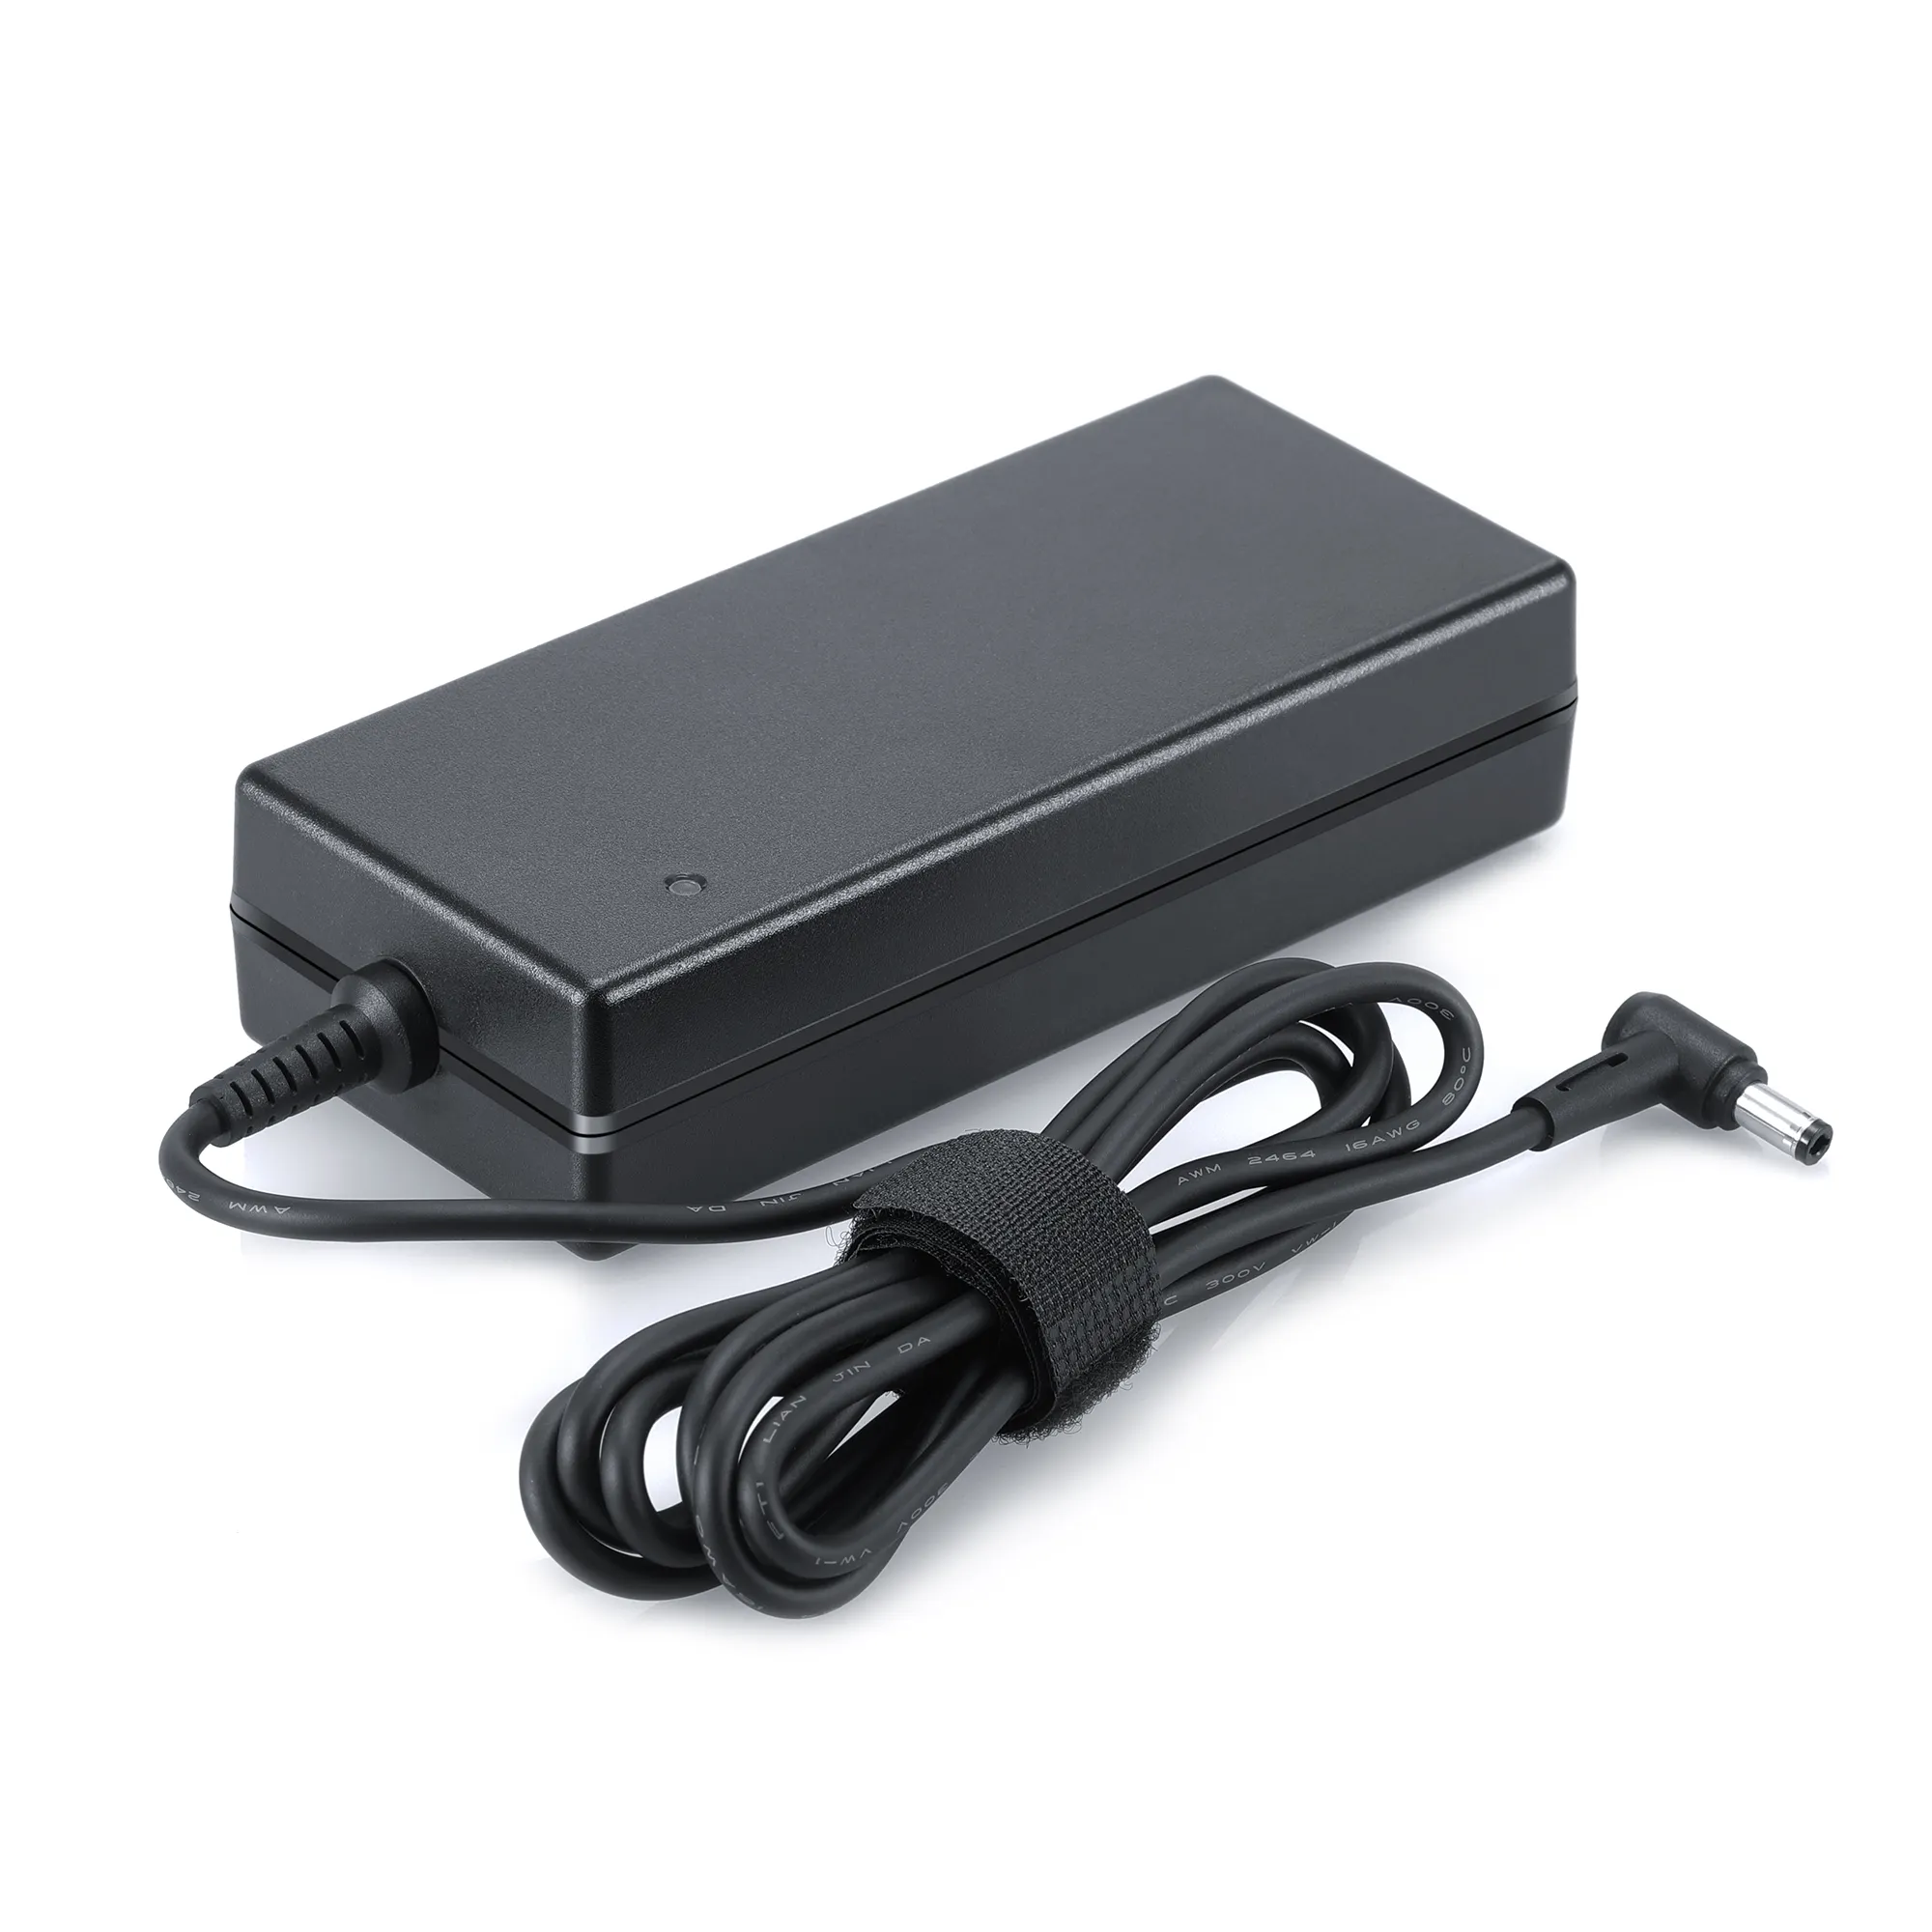 Replacement Laptop Charger 120W 19V 6.32A AC/DC Power Adapter For Asus Dell HP Laptops